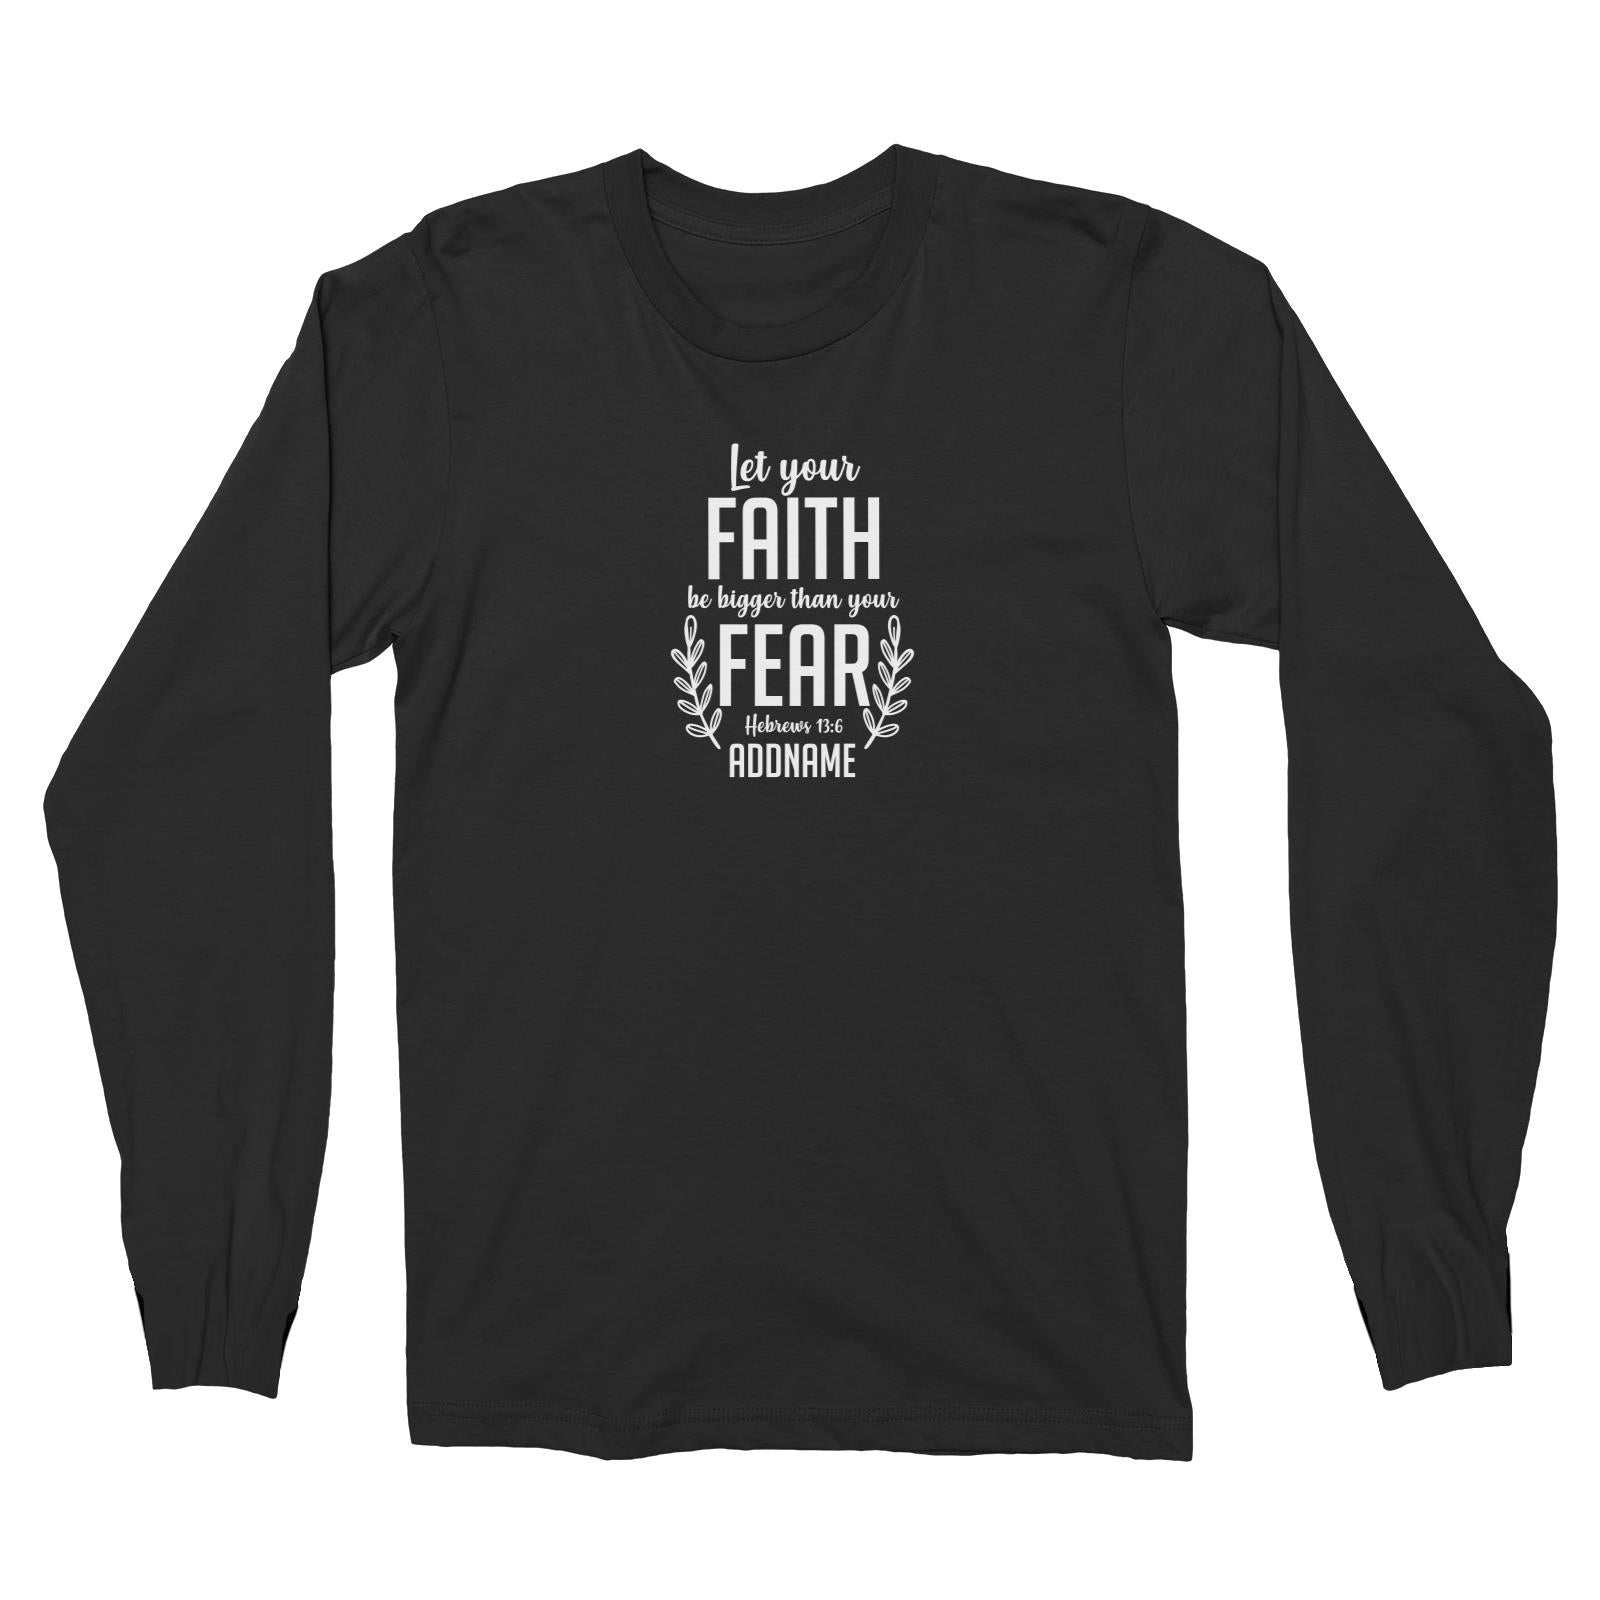 Christ Newborn Let Your Faith Be Bigger Than Your Fear Hebrews 13.6 Addname Long Sleeve Unisex T-Shirt